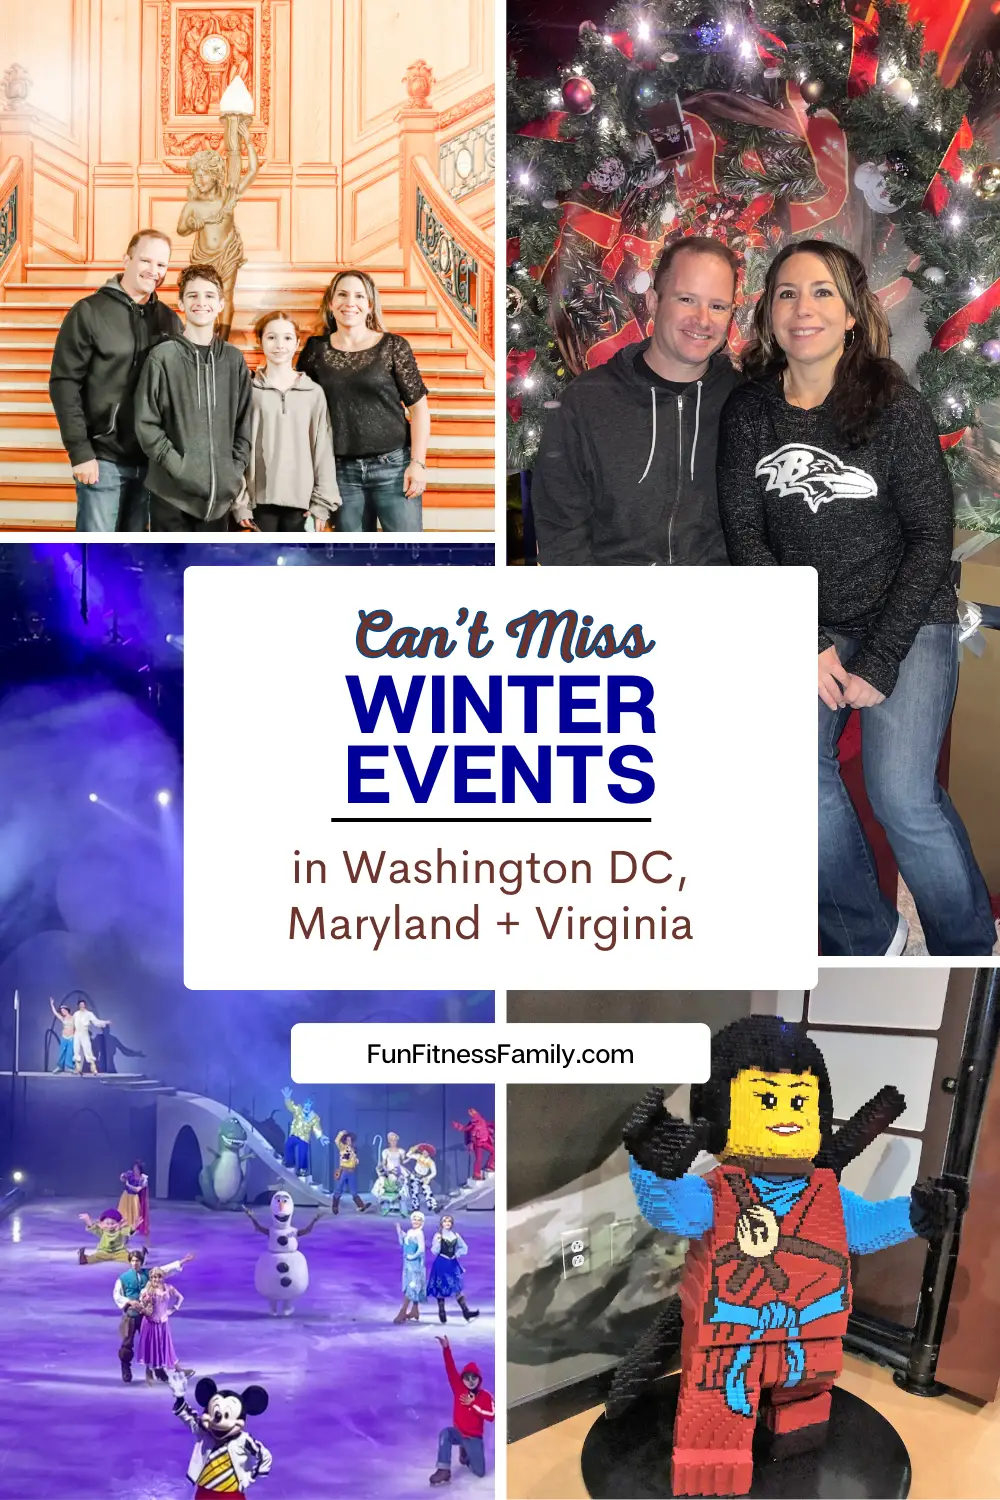 There are plenty of fun winter events in Washington D.C., Baltimore and Northern Virginia. We hope you enjoy our list of winter activities that includes festivals, museum events, and lots of other ways to have fun indoors for the first few months of the new year! 
#baltimore #dc #northernvirginia #winterevents